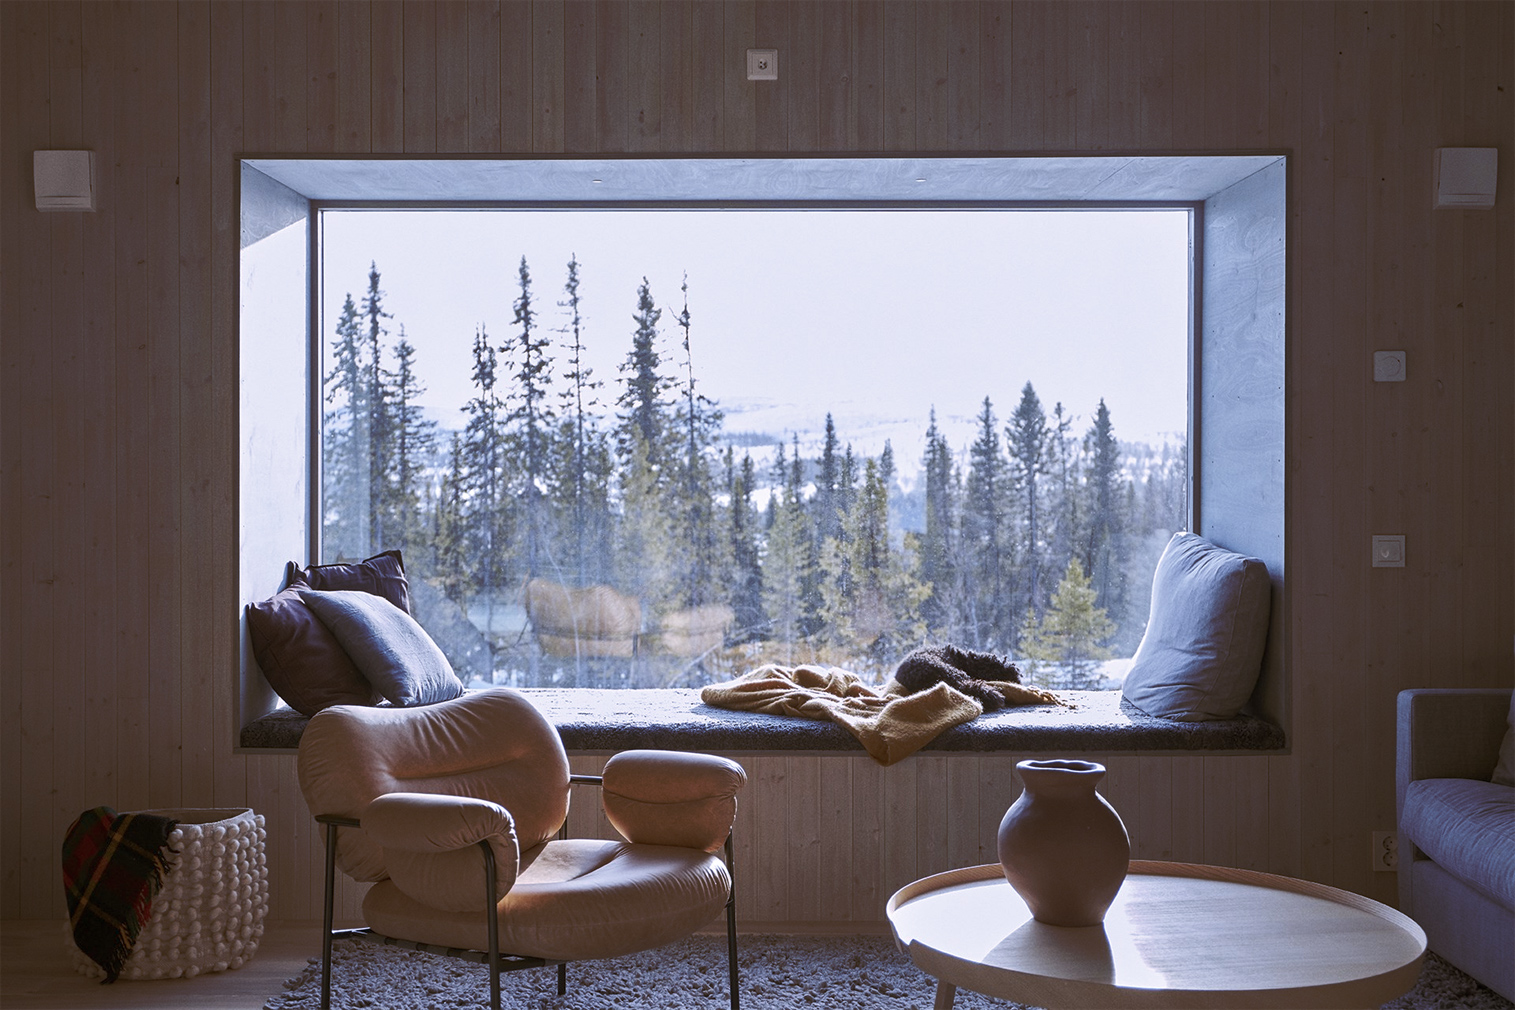 Slope living gets a contemporary spin inside this Vemdalen ski chalet